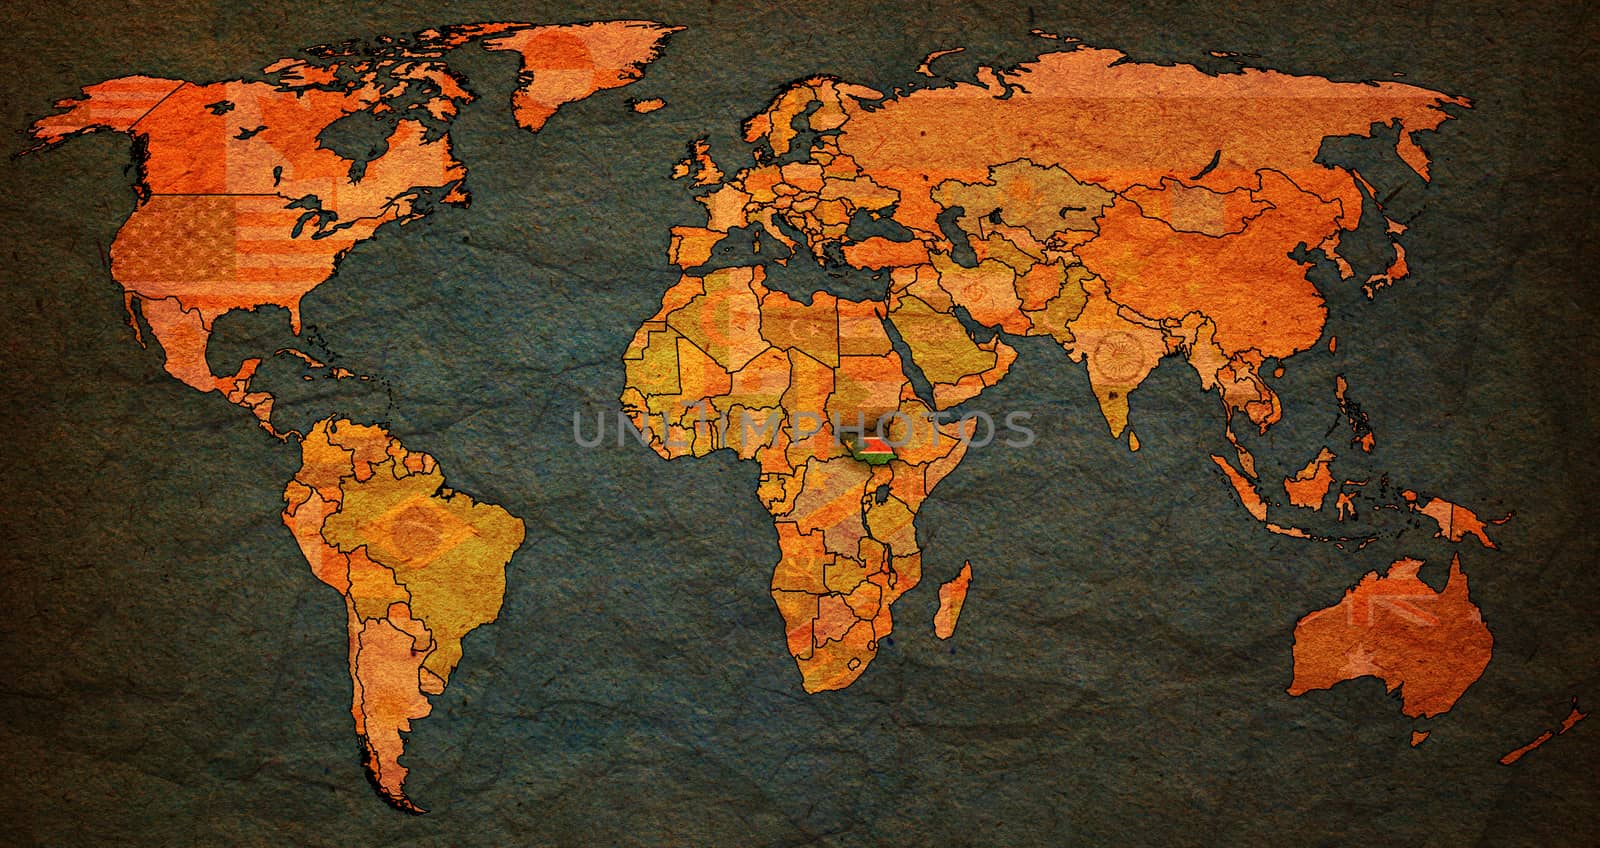 south sudan territory on world map by michal812